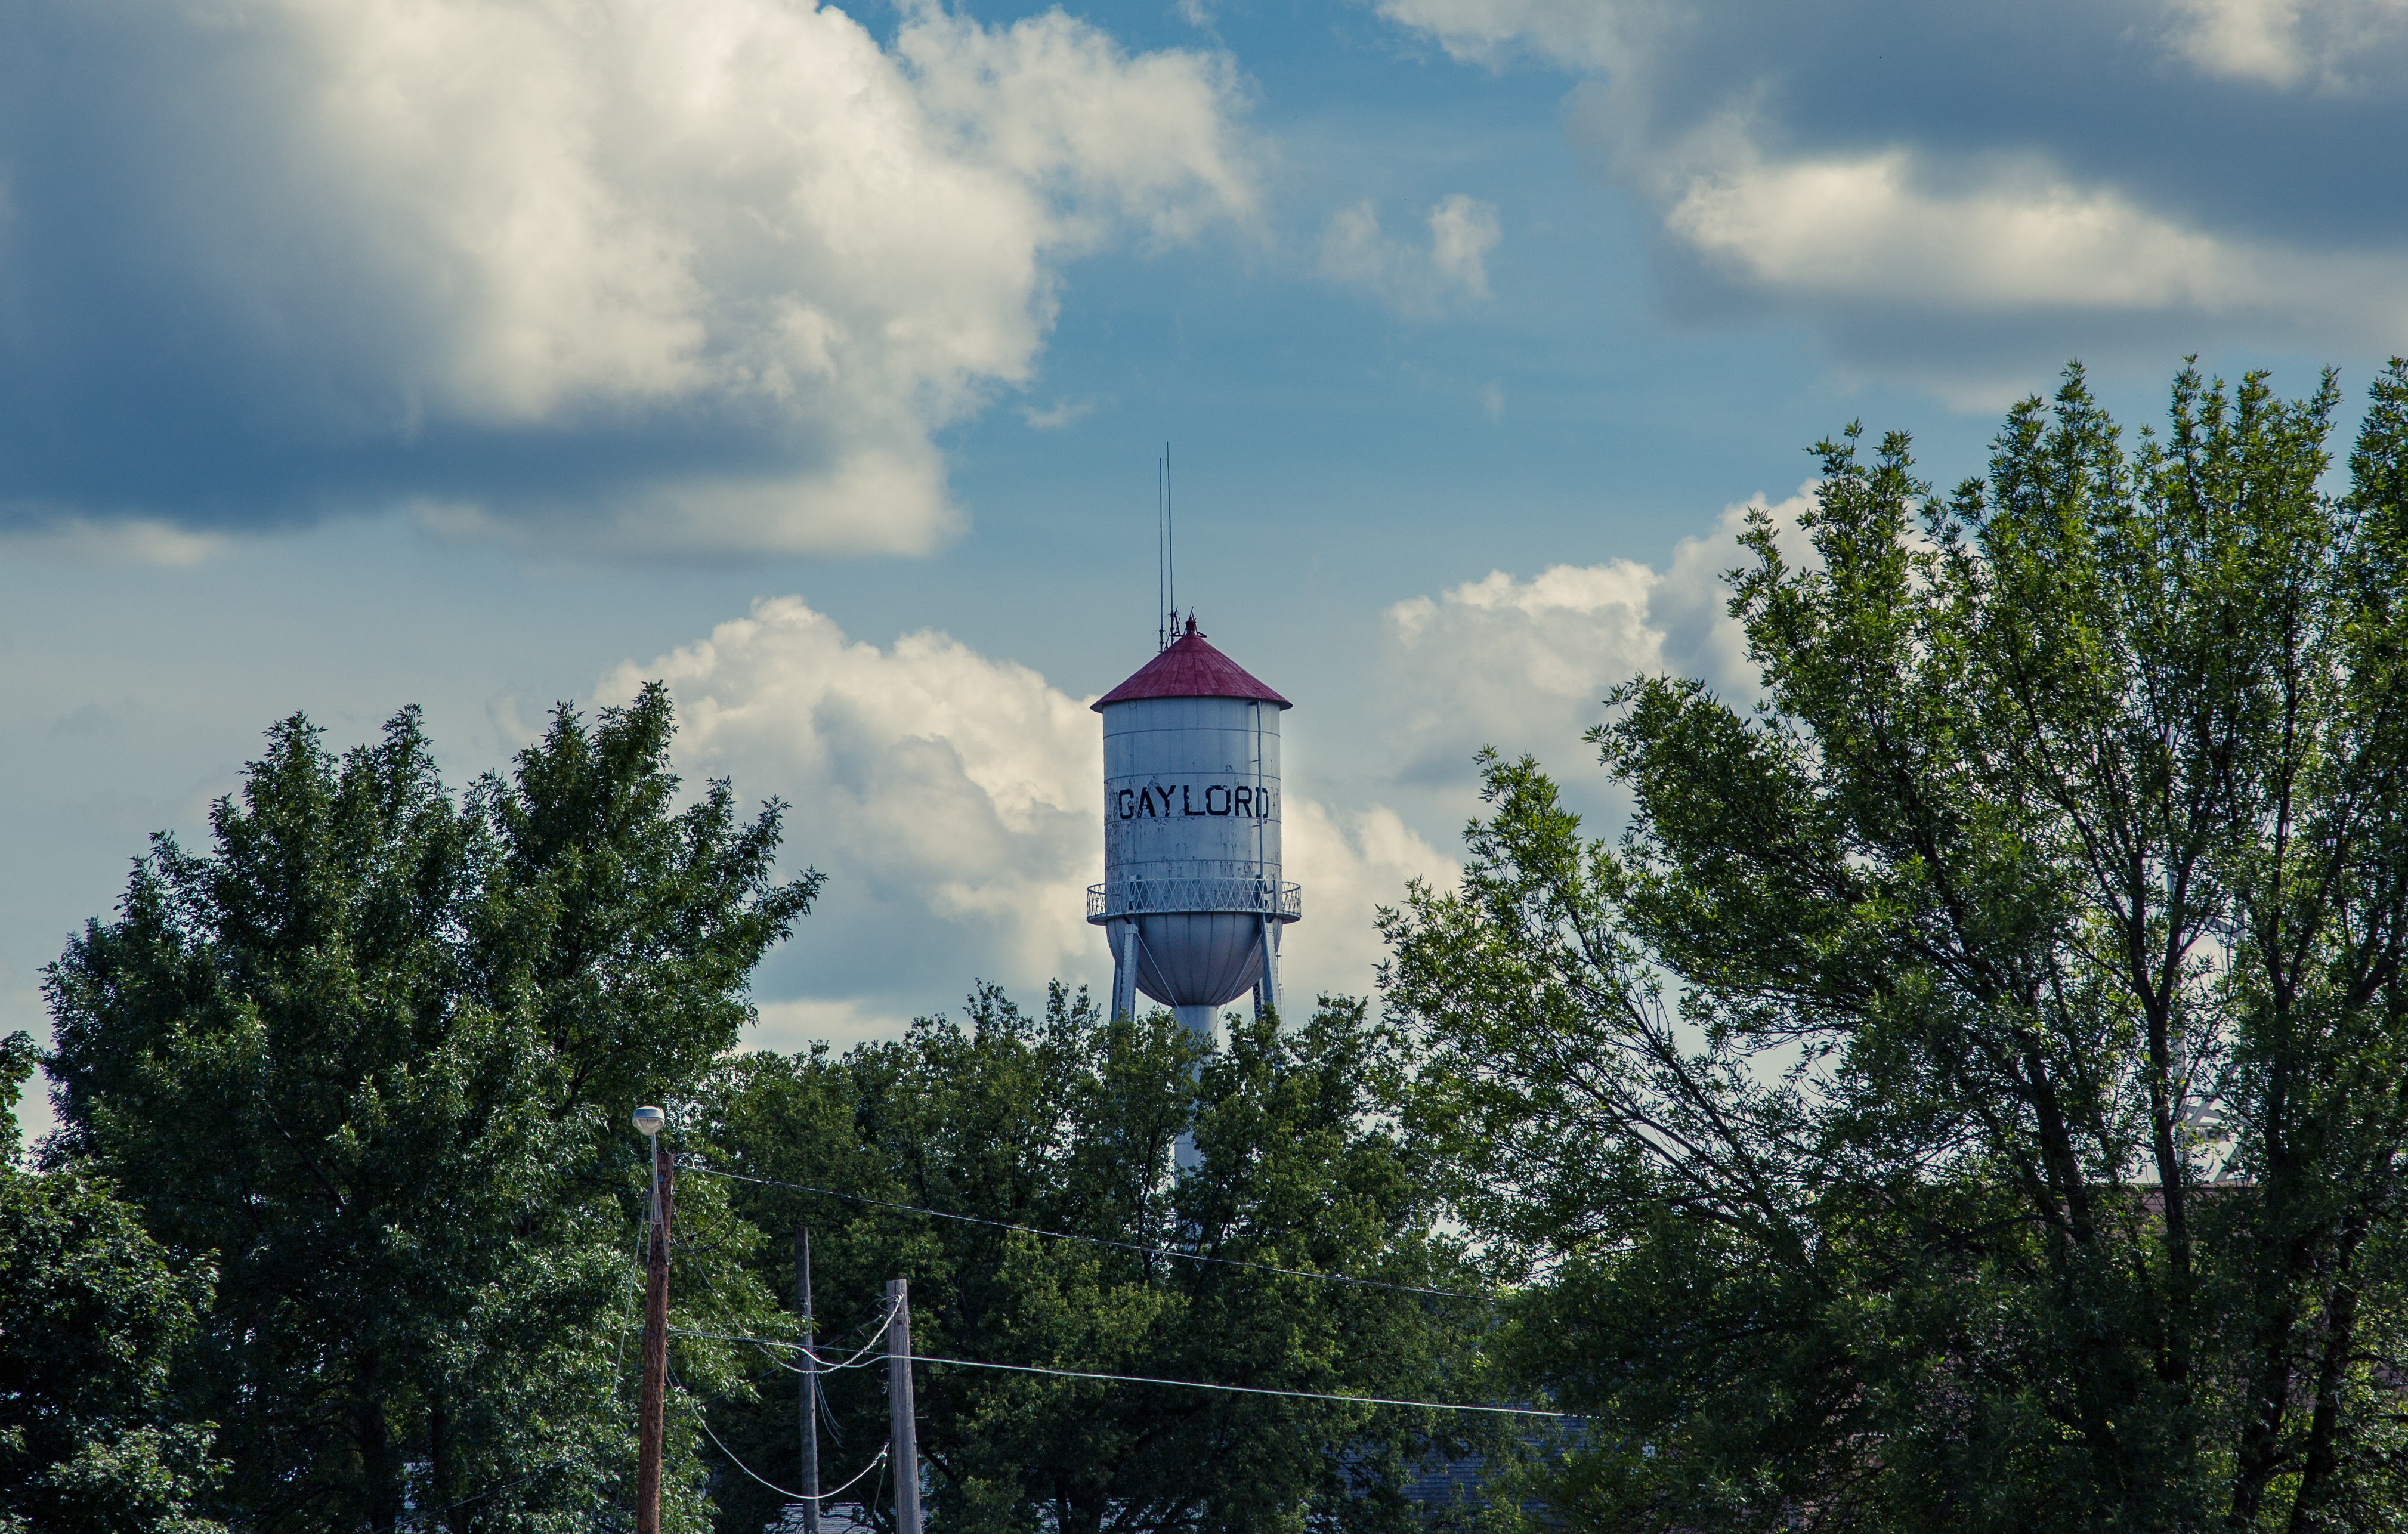 The Gaylord, Minnesota water tower as seen from Cleveland Street next to the Sibley County Courthouse. Photo by Tony Webster. Used under Creative Commons license via Flickr.